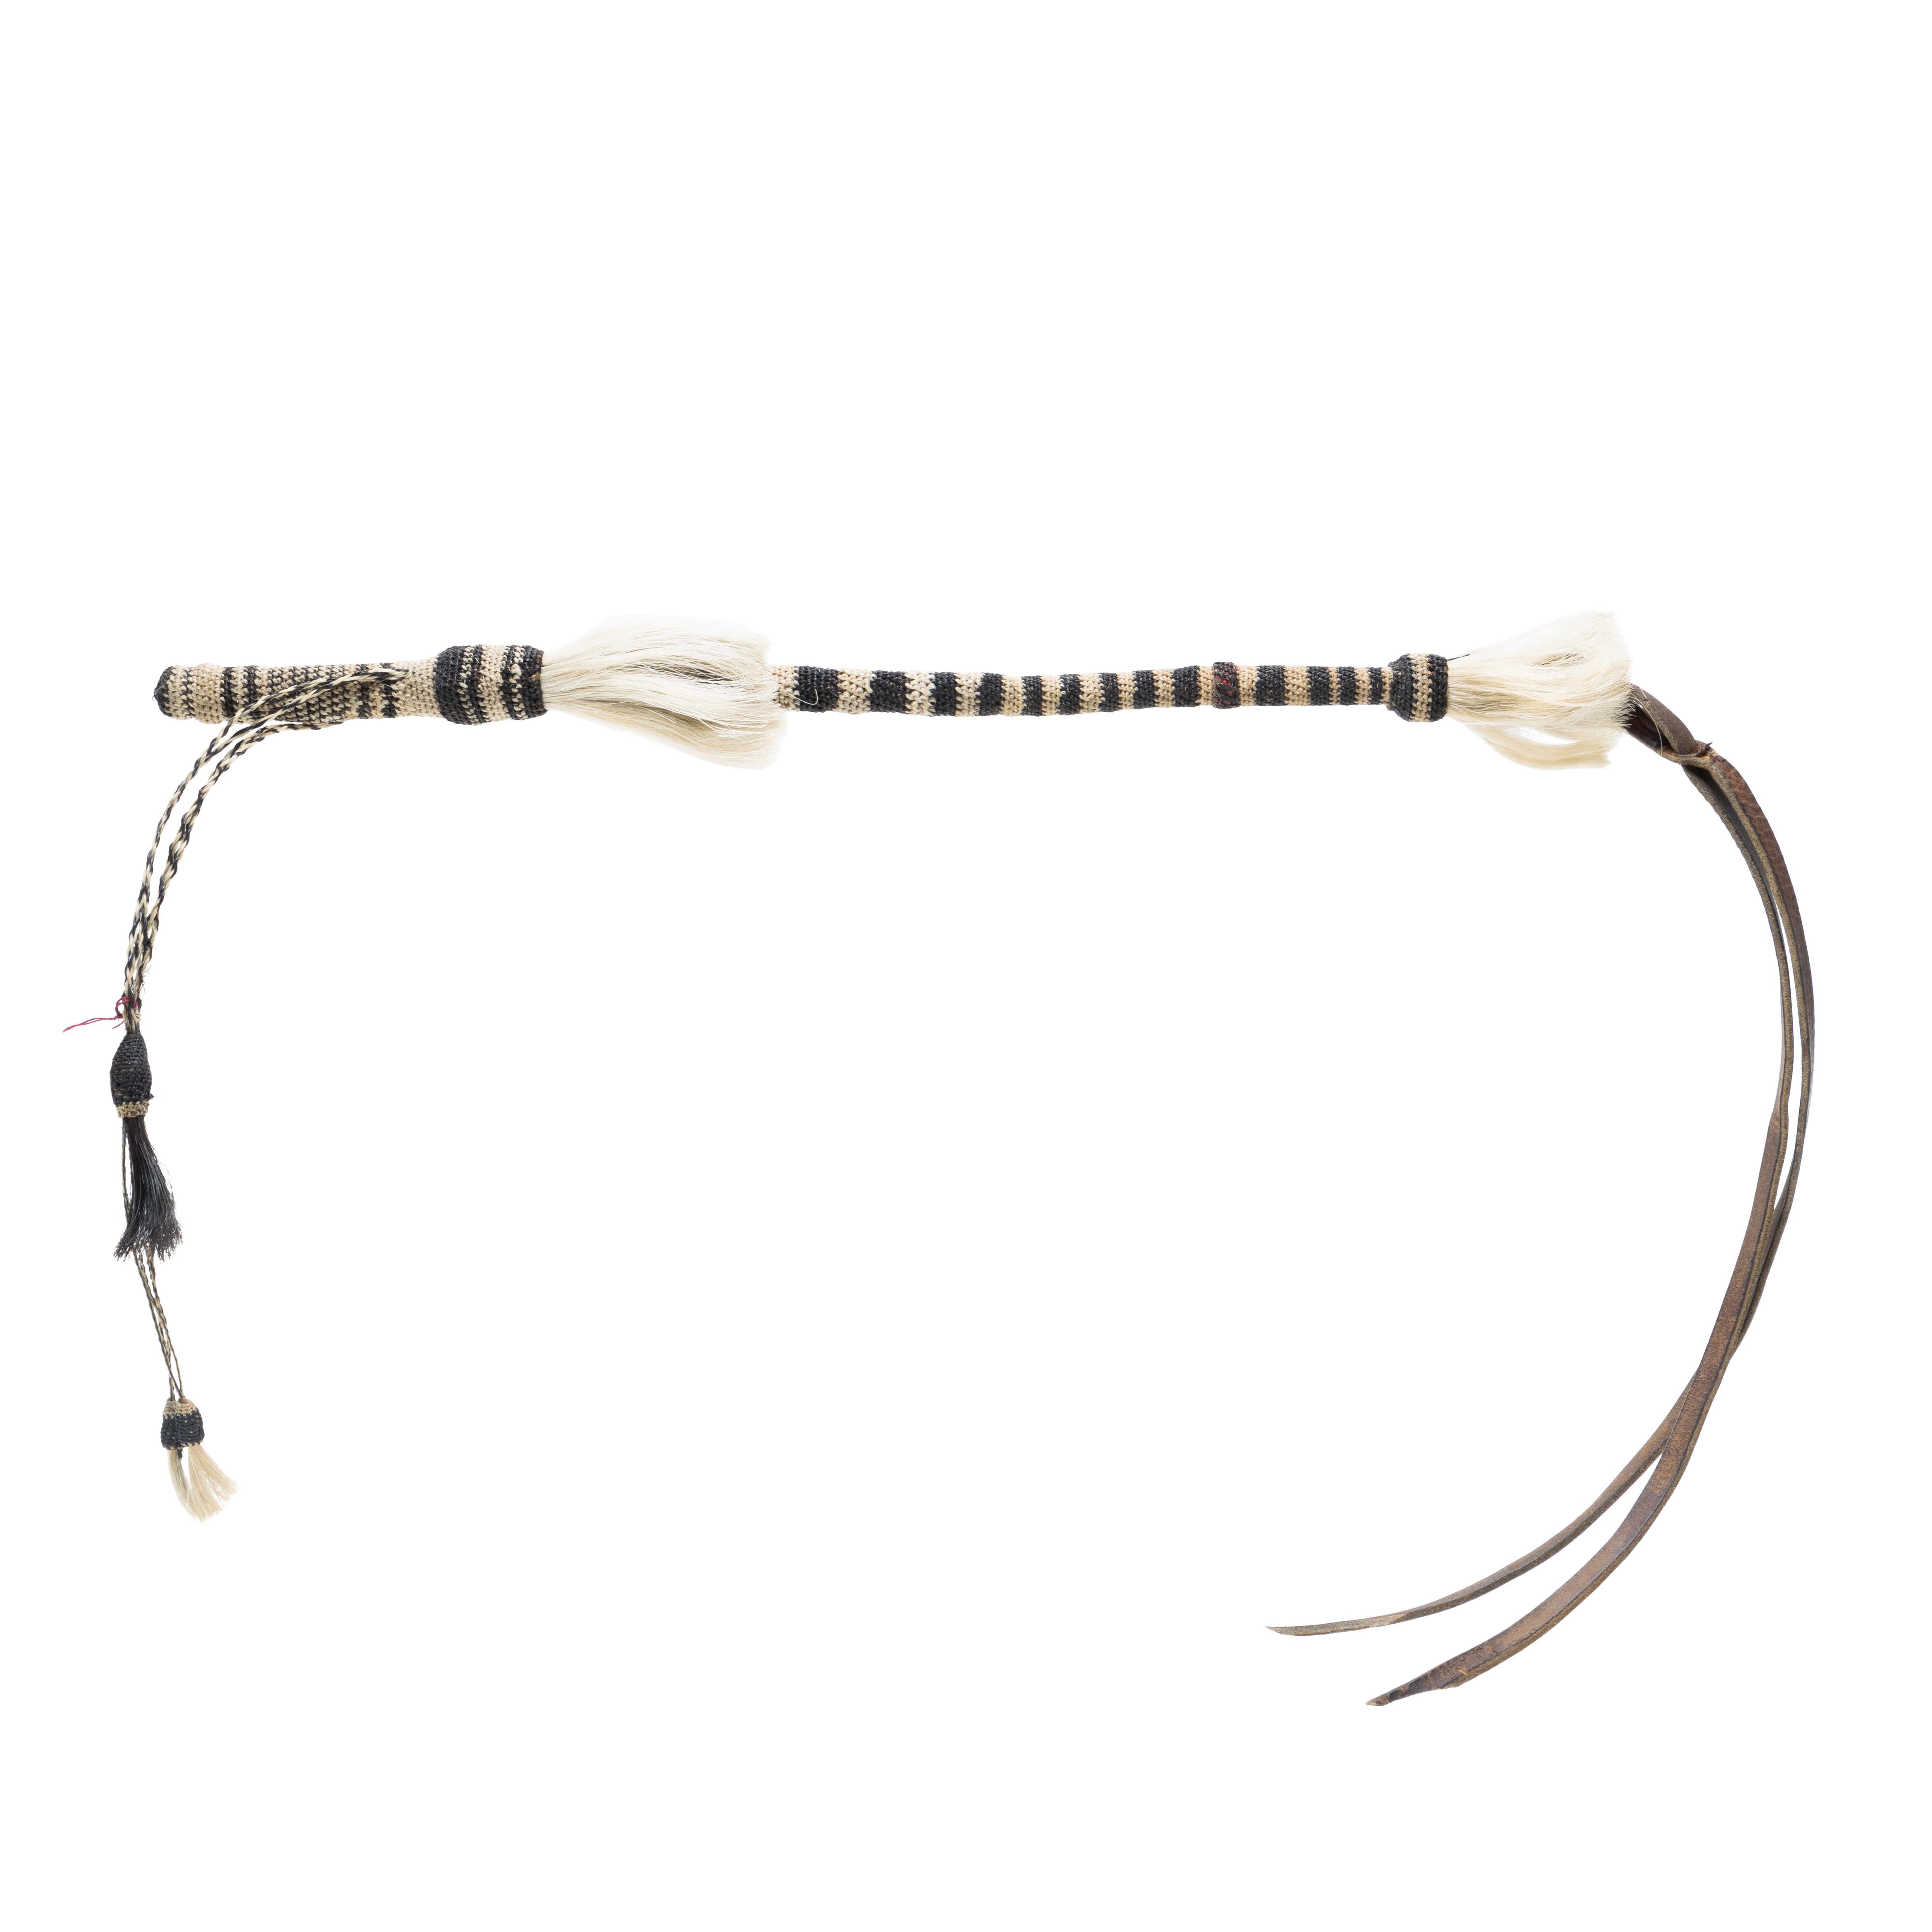 Horsehair quirt with original leather flapper and buttons. Like new condition. From Montana. Whitish/cream and black stripes and braided horse hair. 
PERIOD: First Half 20th Century
ORIGIN: Montana, United States
SIZE: 18